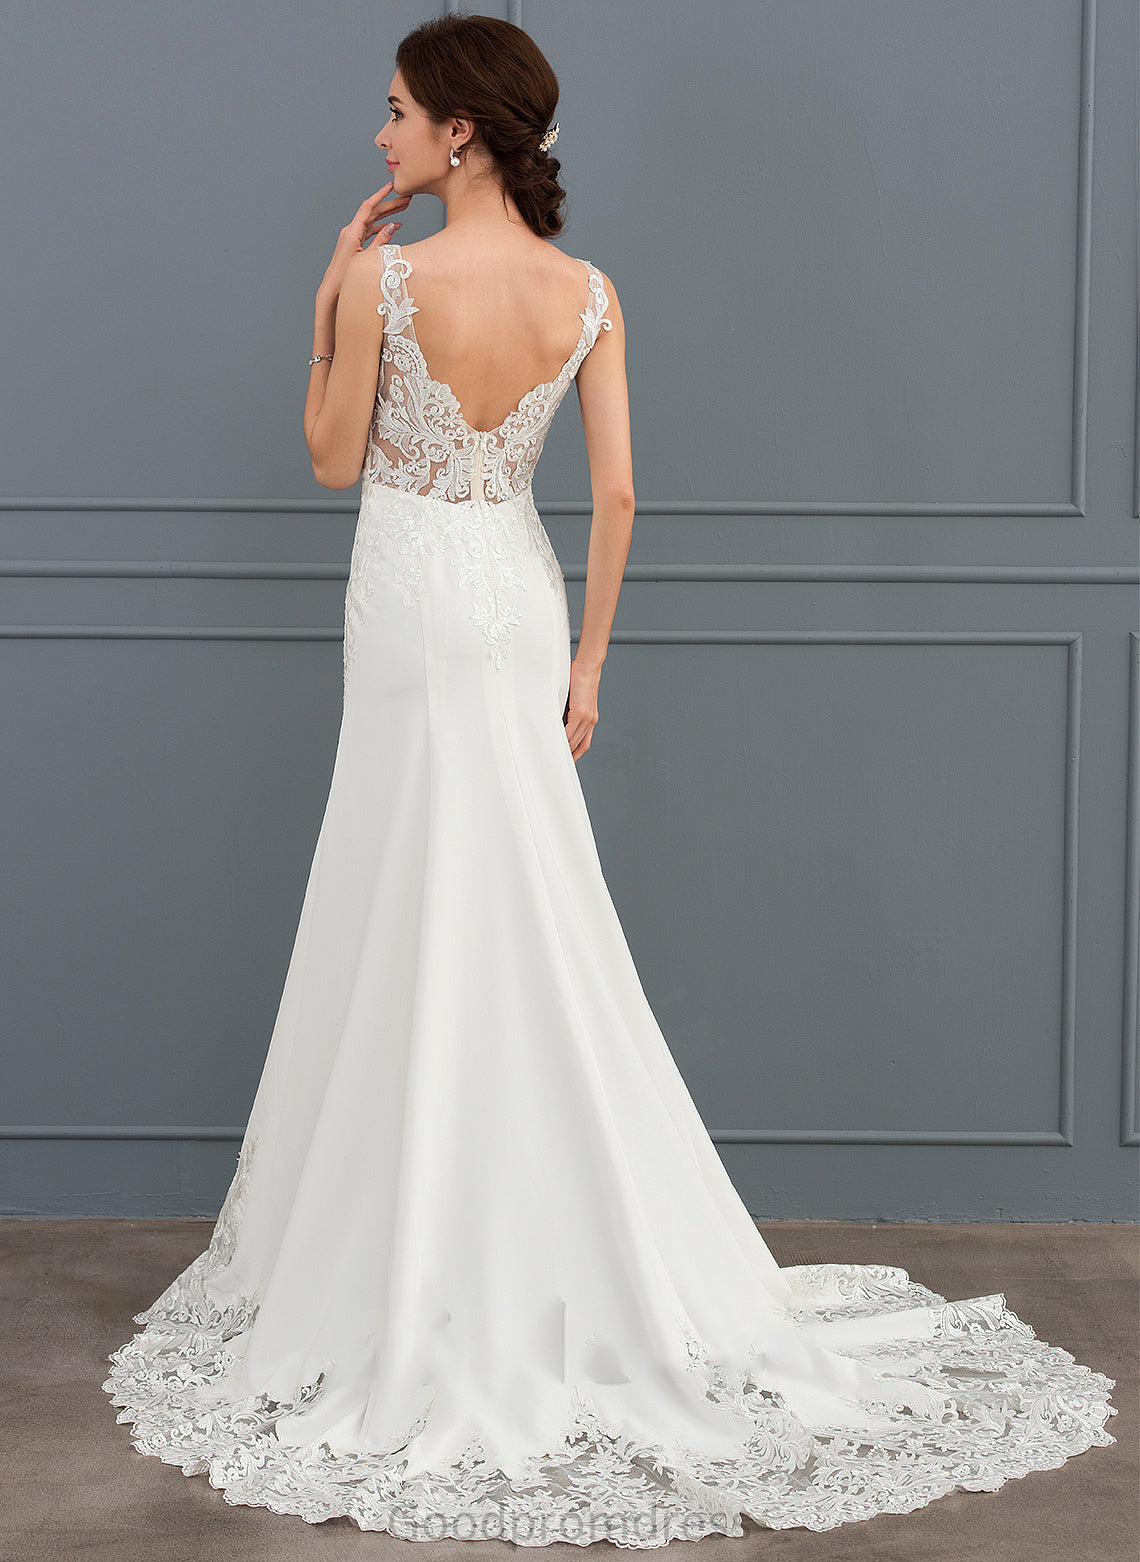 Dress Wedding Dresses V-neck Sequins Chasity Court Crepe Trumpet/Mermaid Stretch Train Wedding Lace With